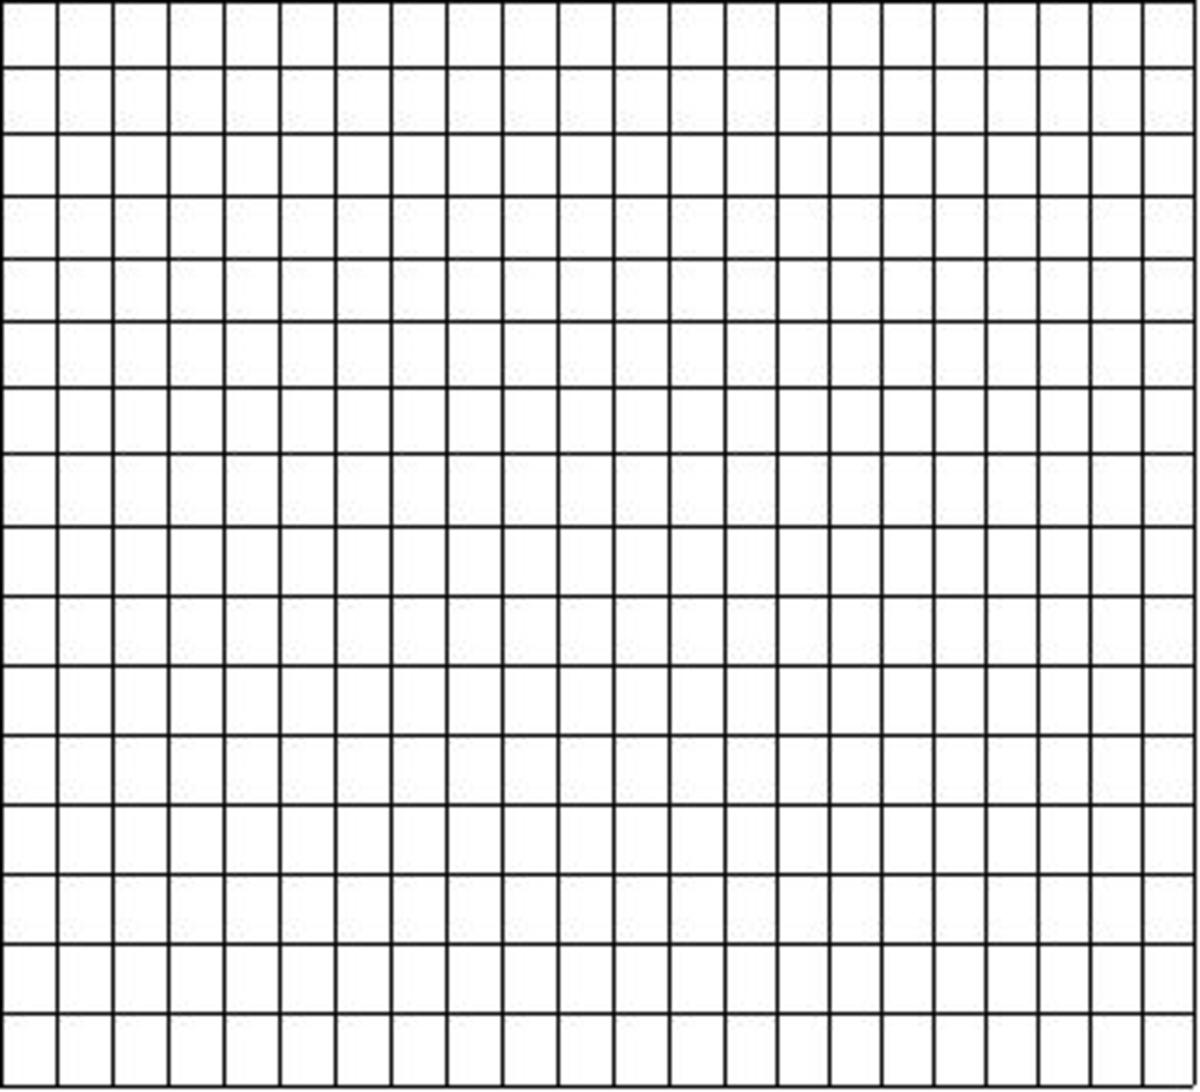 A simple grid is the start of a word search puzzle, also known as a seek and find.